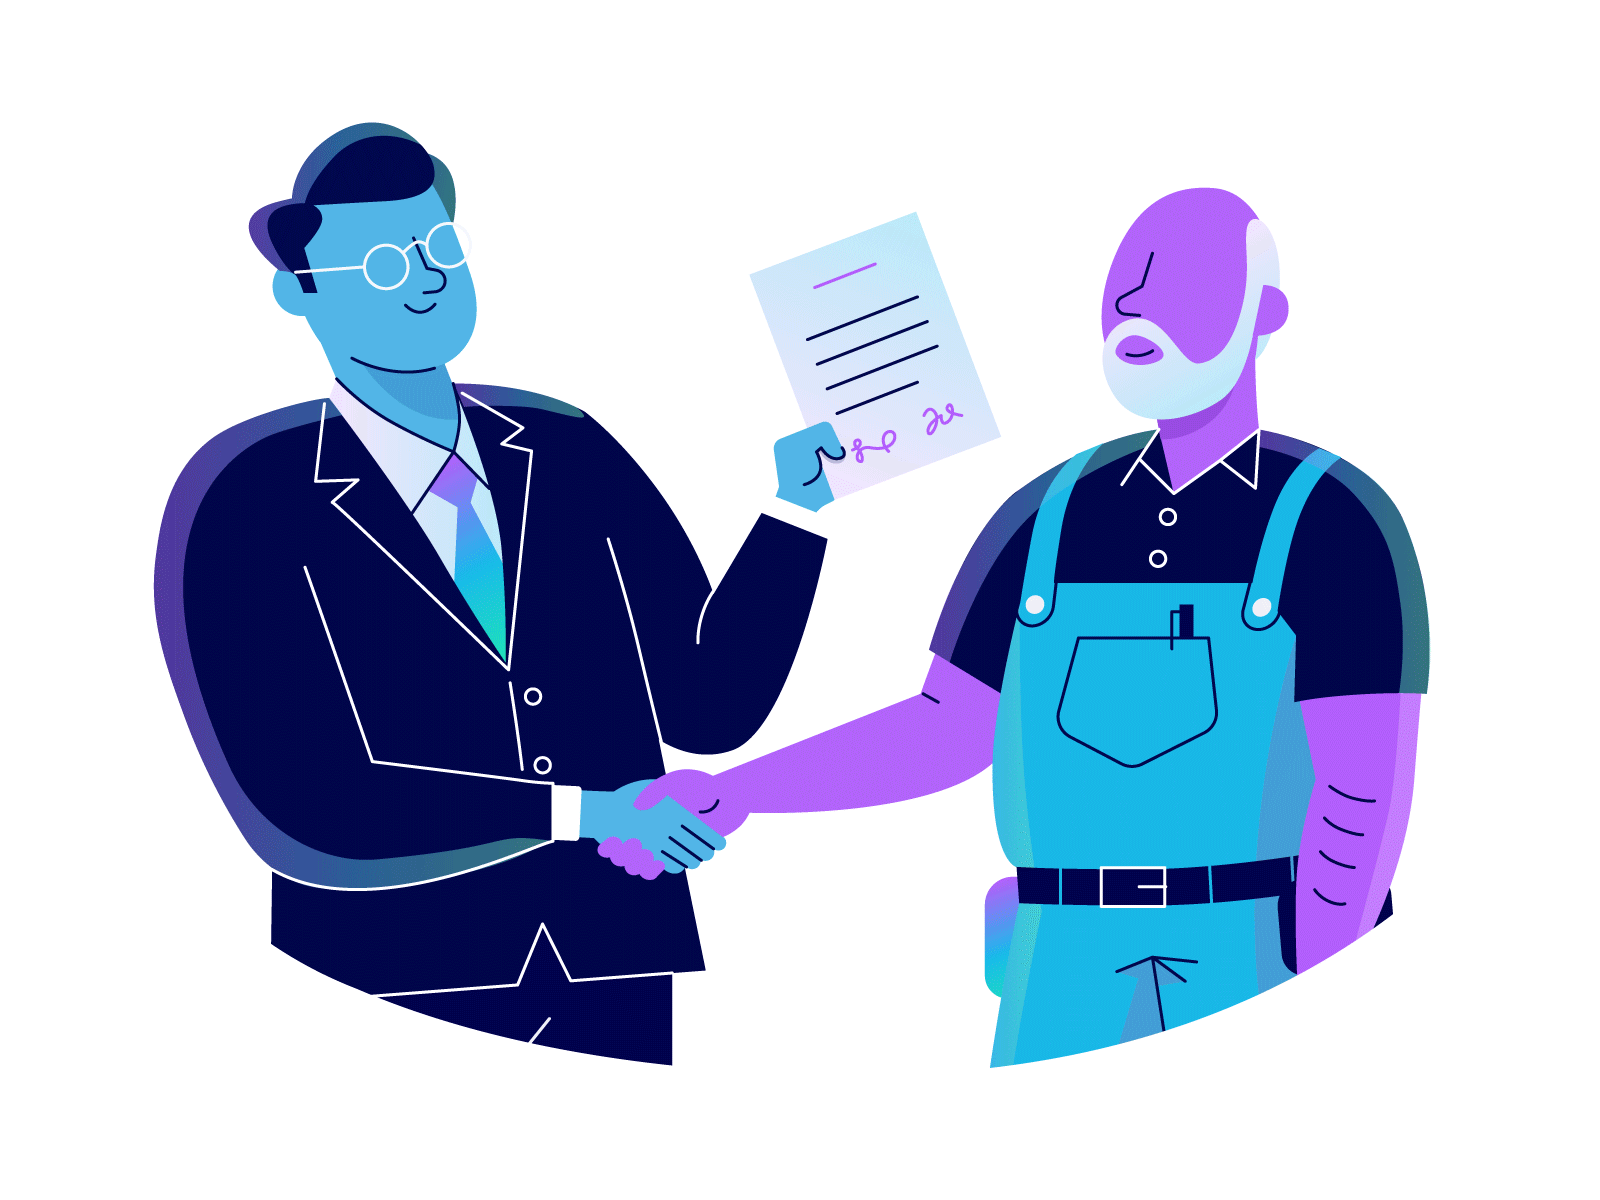 Hold harmless agreements - blog post illustrations accident character contract design illustration infographic vector